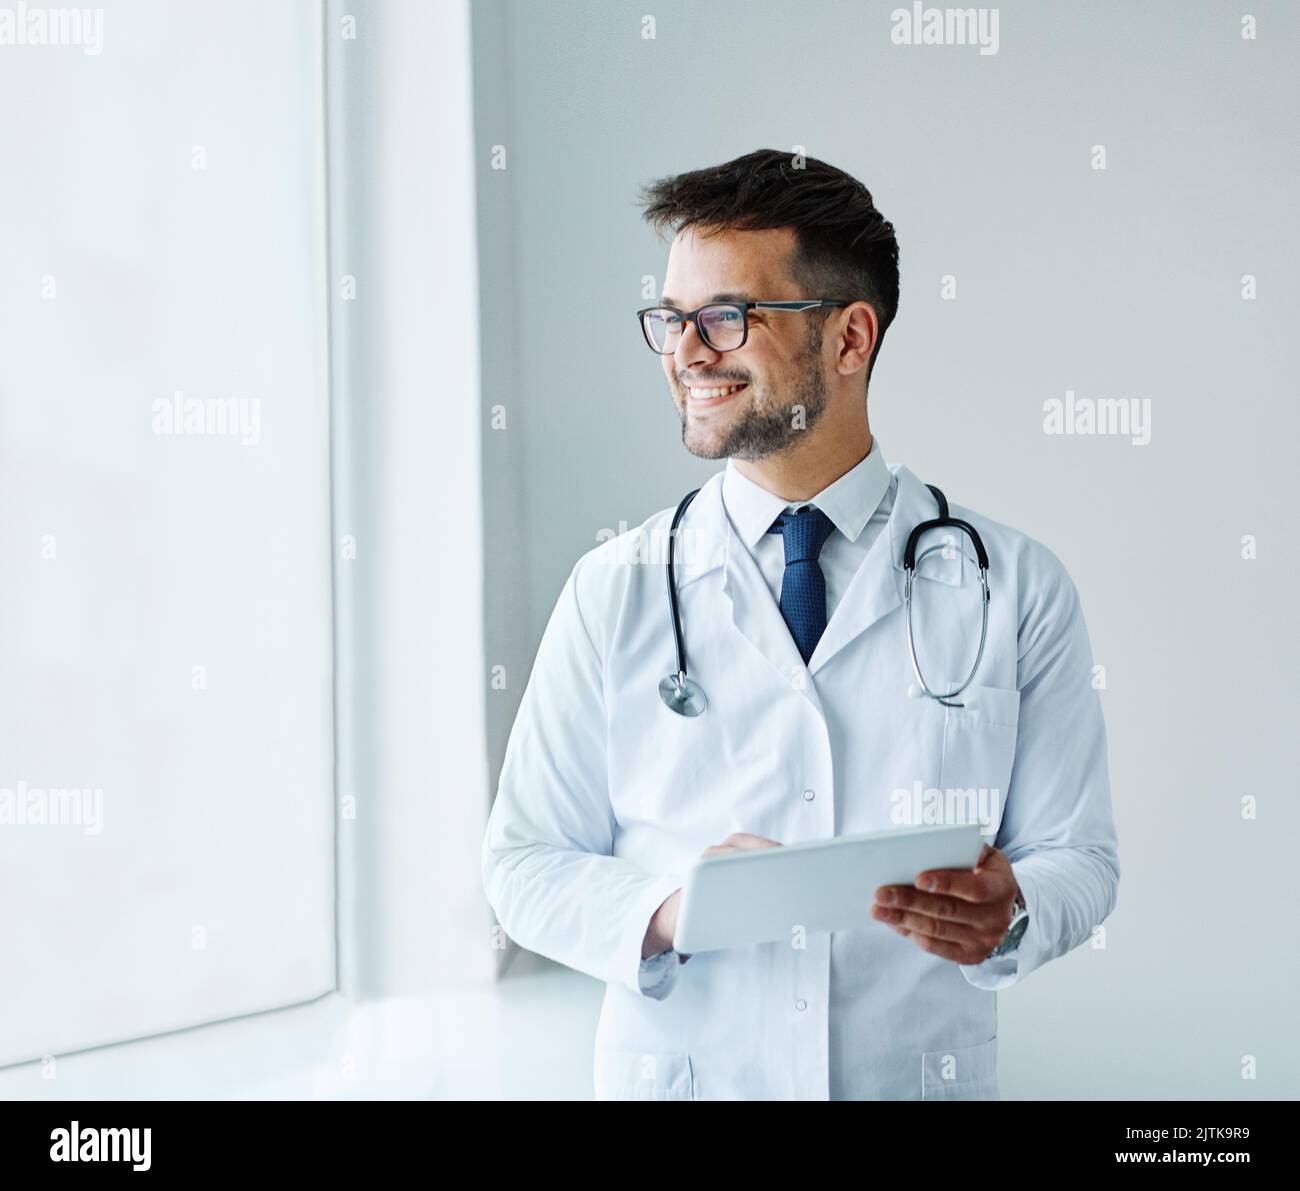 young doctor hospital medical medicine health care clinic office portrait glasses man stethoscope specialist tablet computer Stock Photo